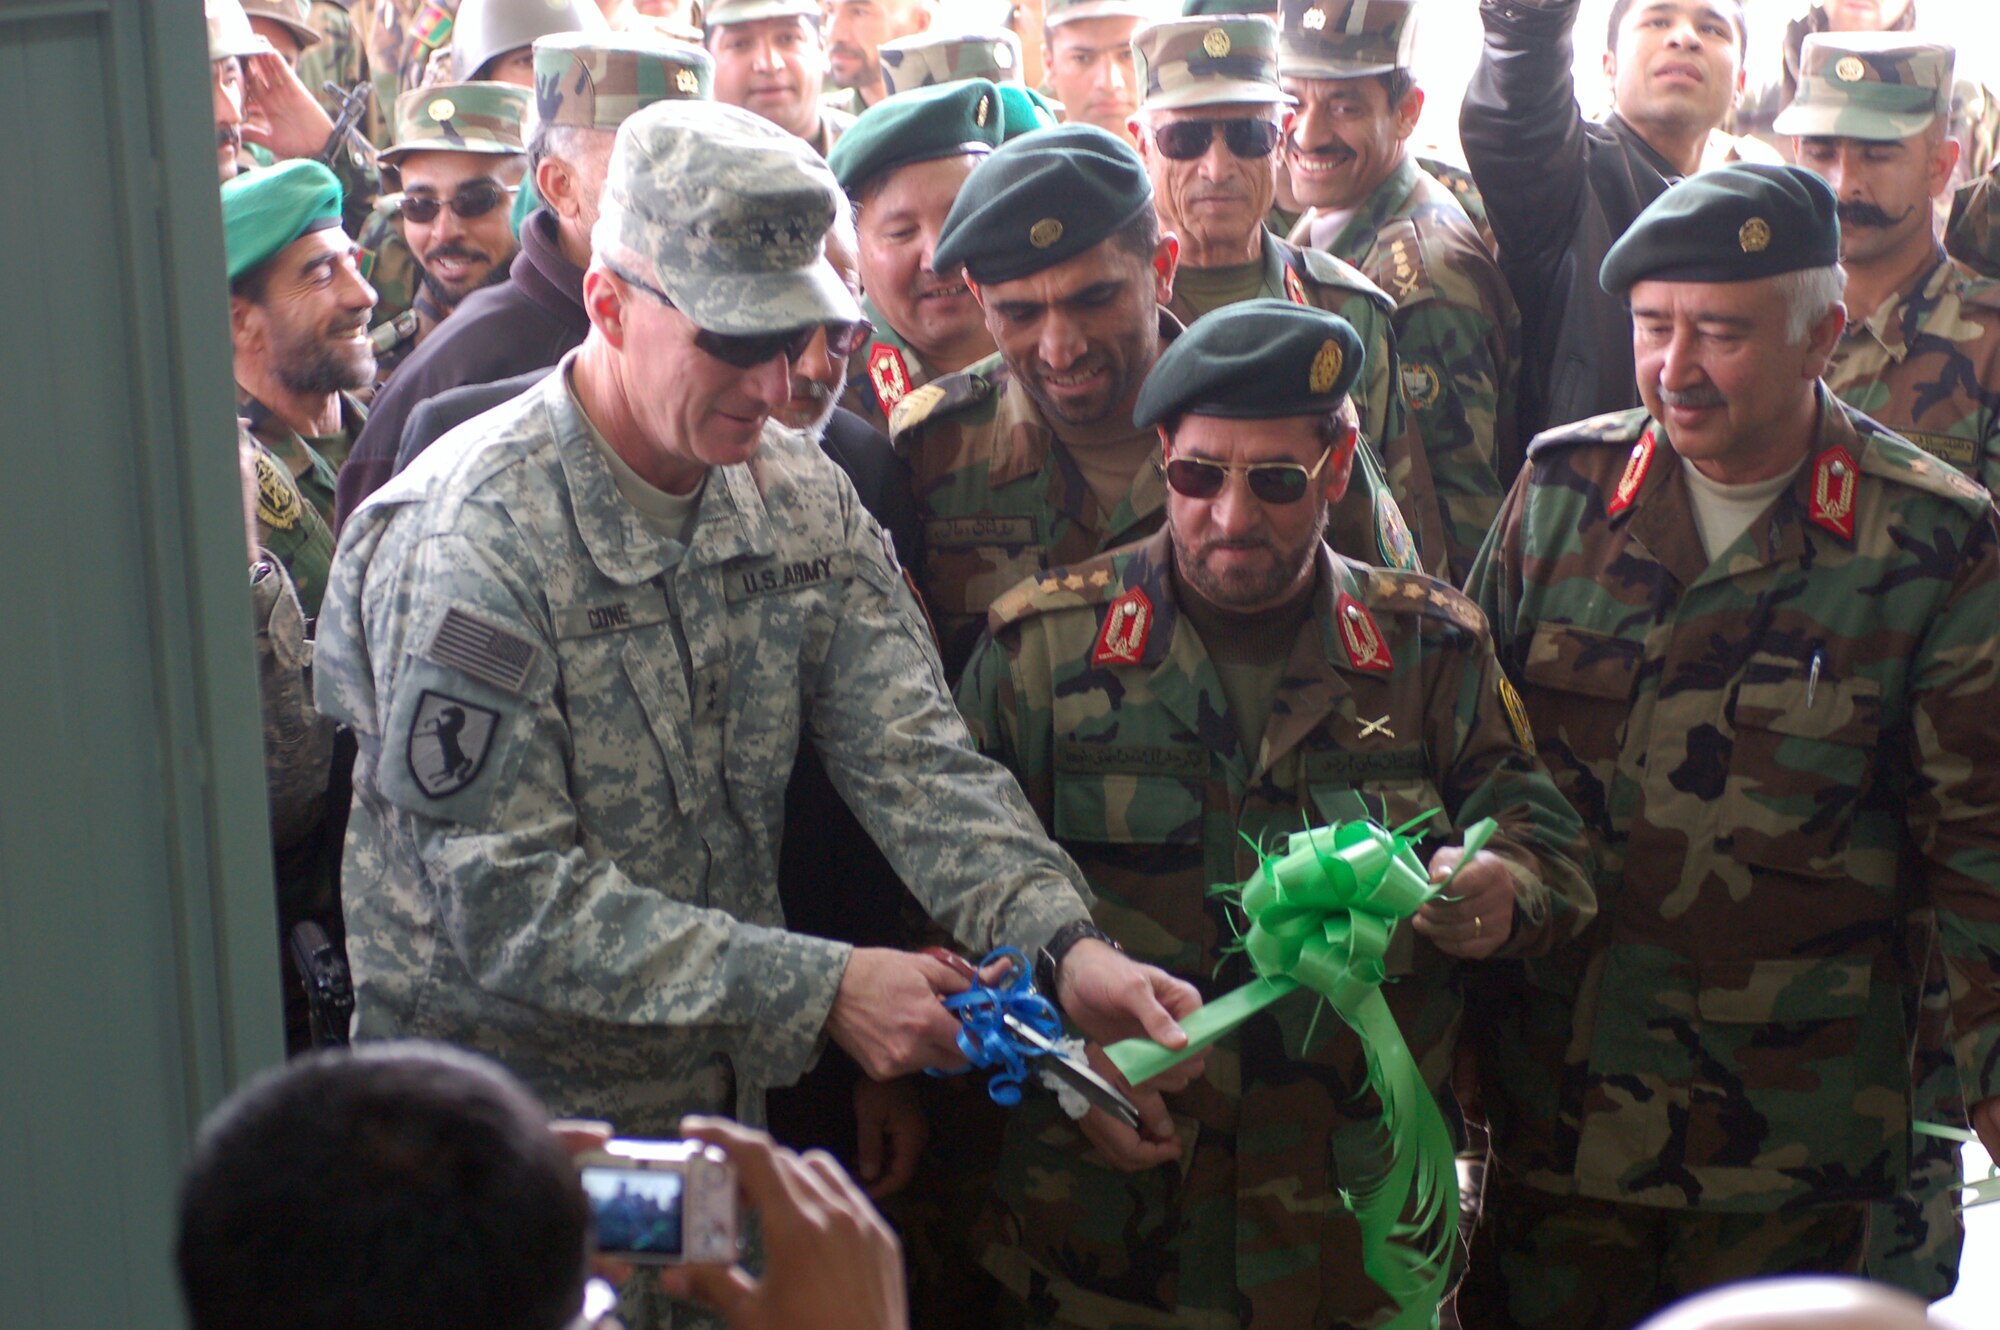 Maj. Gen. Robert Cone, Combined Security Transition Command-Afghanistan commanding general, cuts a ribbon at Kabul Military Training Center. The ceremony marked the establishment of a new ANA NCO academy. (Photo by Air Force Staff Sgt. Robert R. Wollenberg Jr.) (Released) 